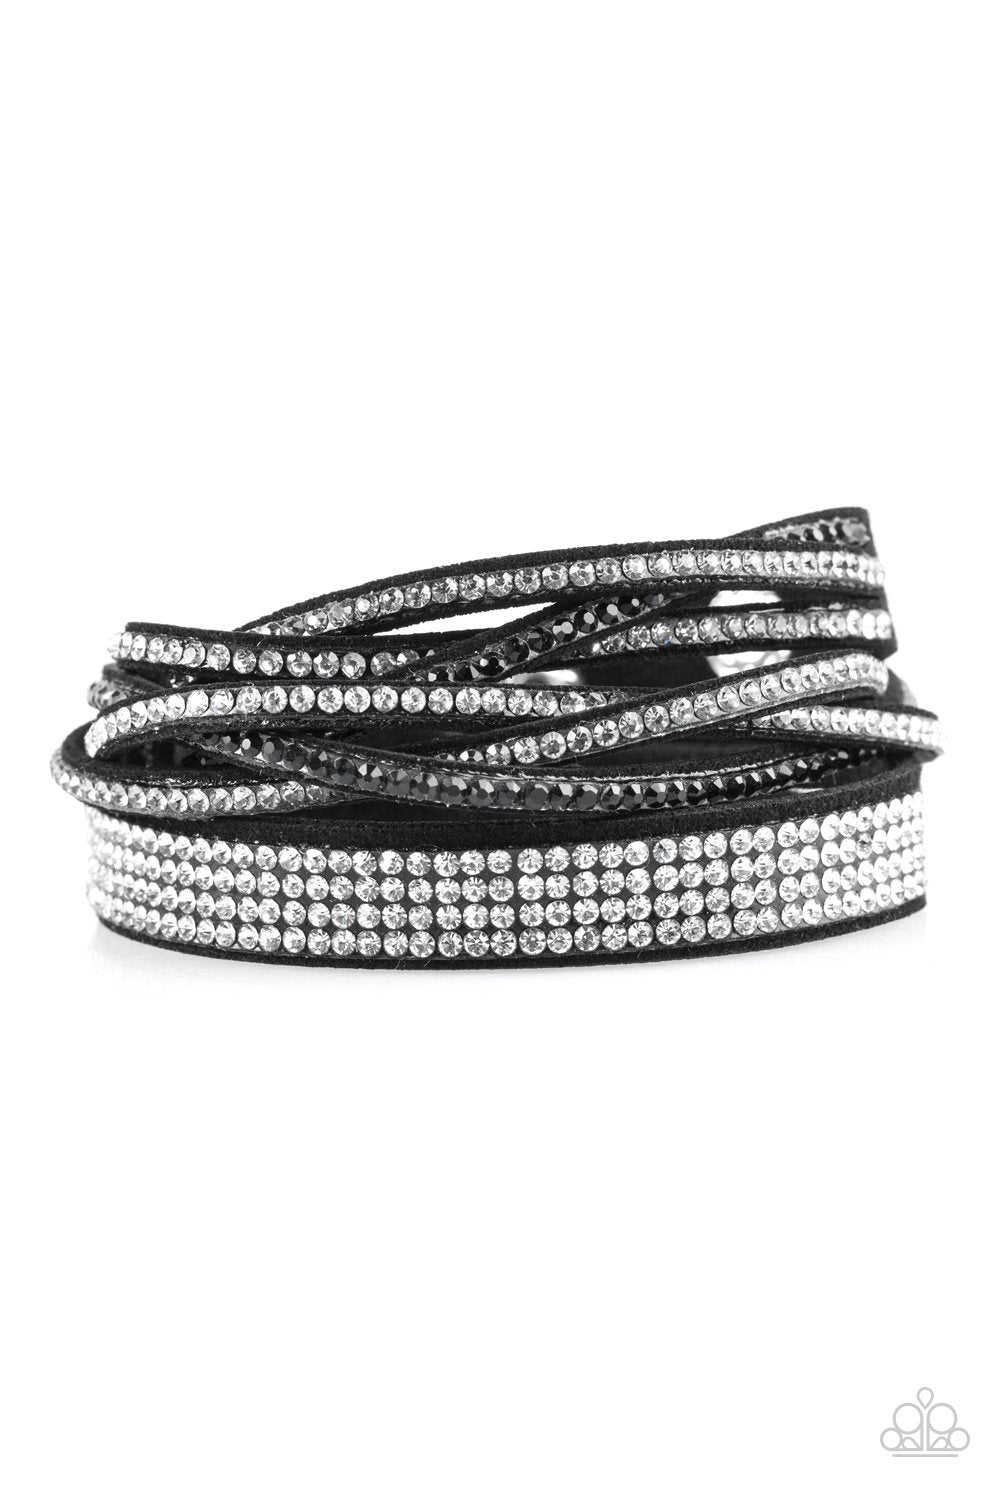 Taking Care Of Business Black and White Rhinestone Double-wrap Snap Bracelet - Paparazzi Accessories- lightbox - CarasShop.com - $5 Jewelry by Cara Jewels